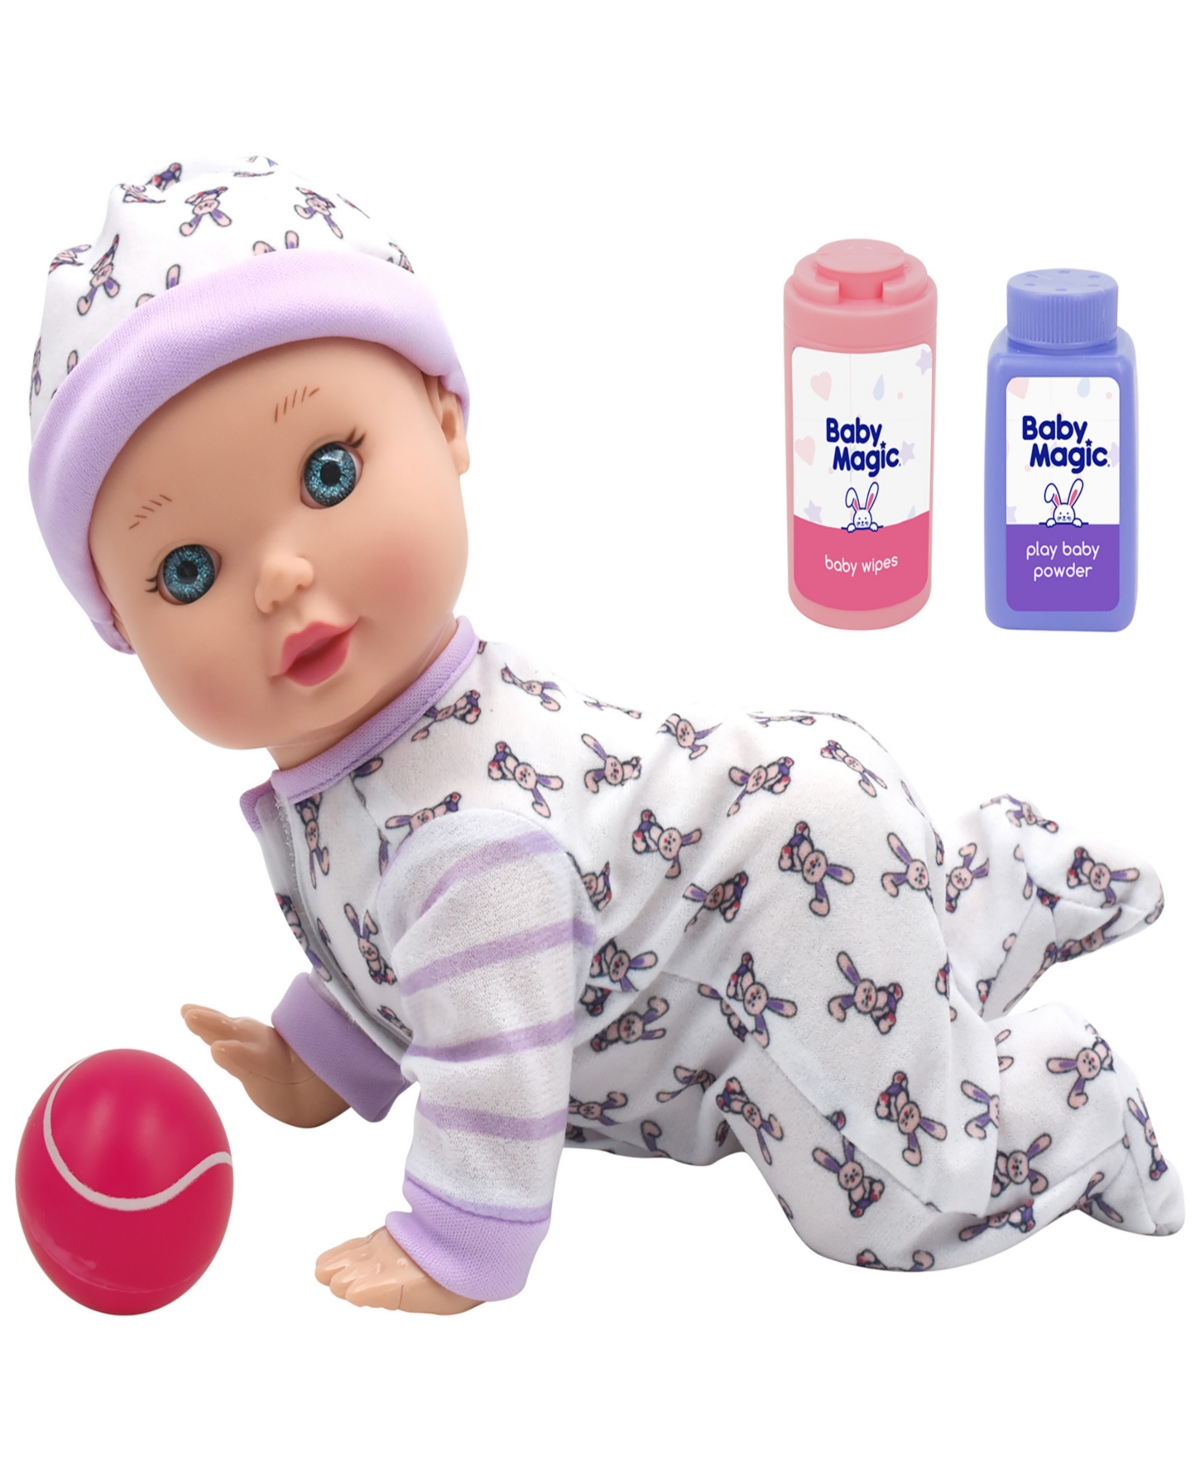 Little Darlings Crawling Baby 10" Baby Doll Playset, New Adventures, Children's Pretend Play, Ages 2 And Up In Multi